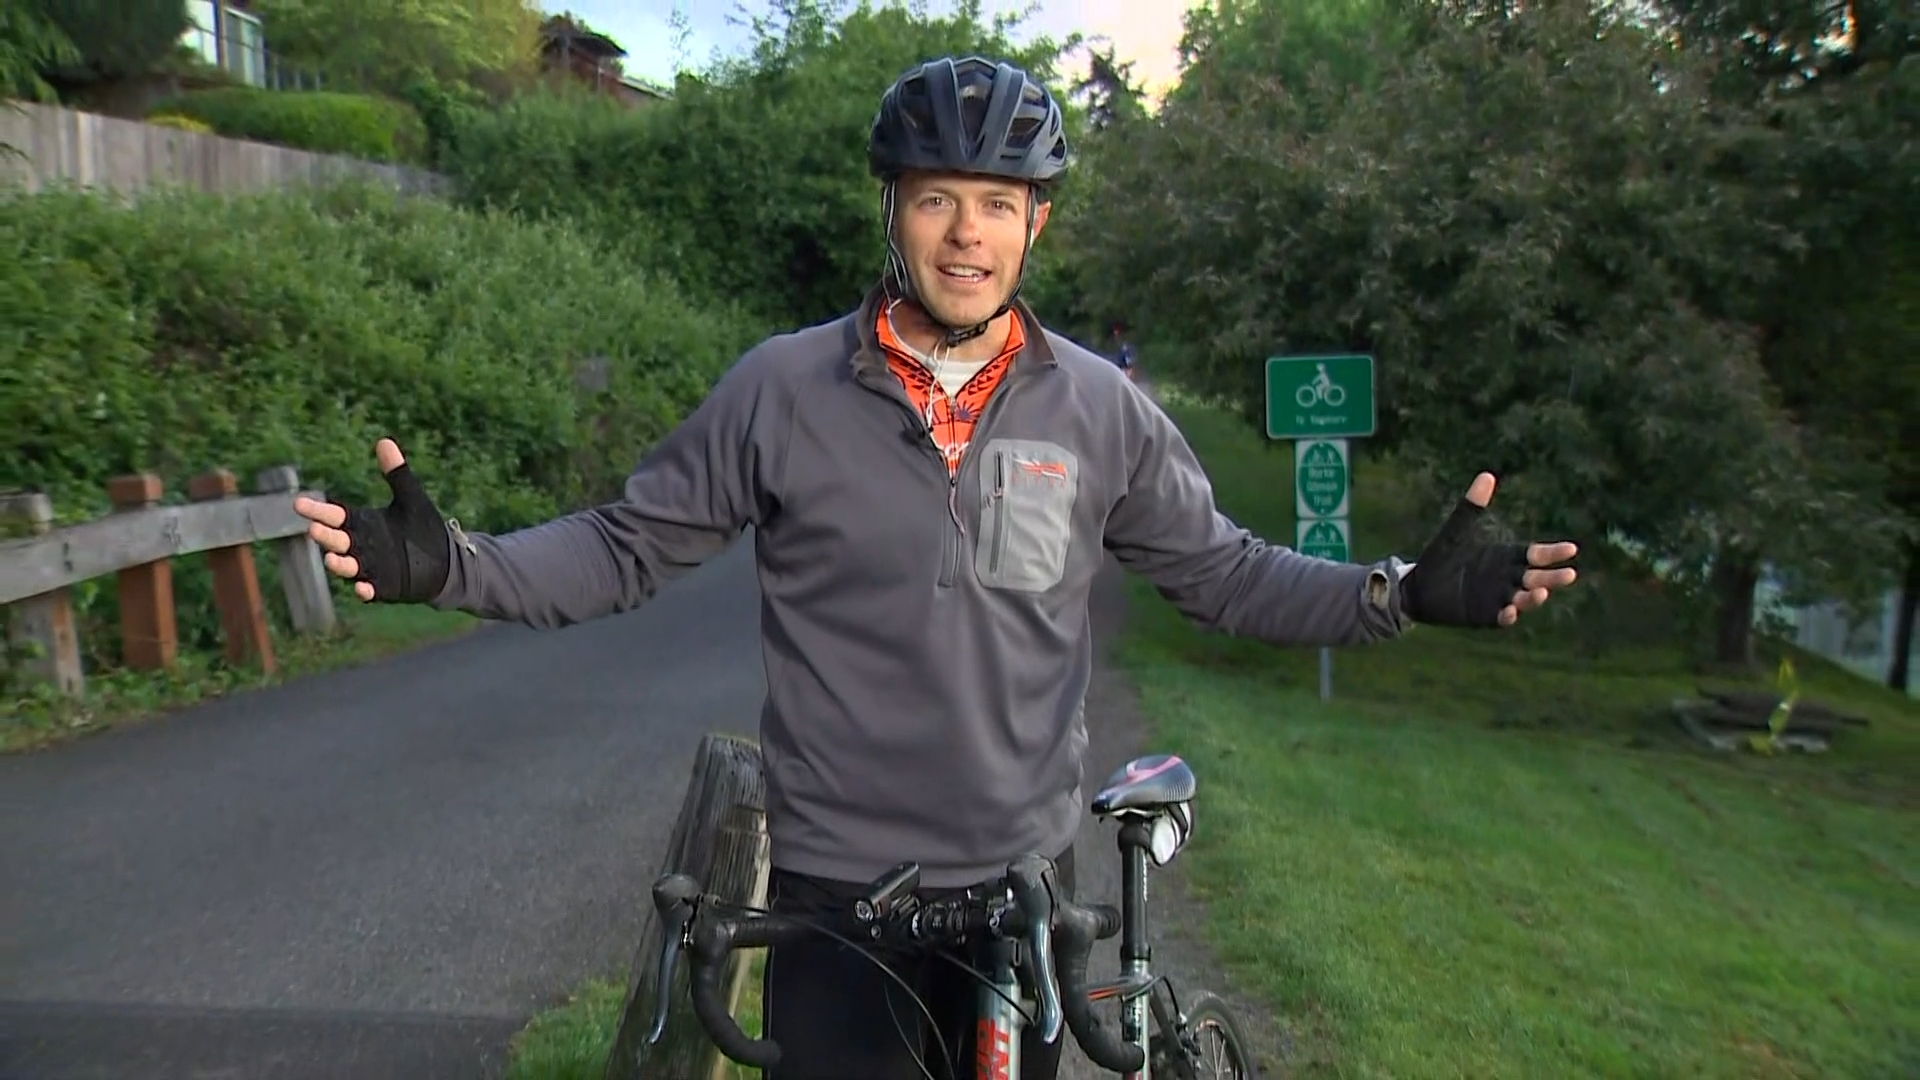 KING 5 Anchor Jake Whittenberg rode his bike to the studio, to encourage everyone to get out and enjoy the trails